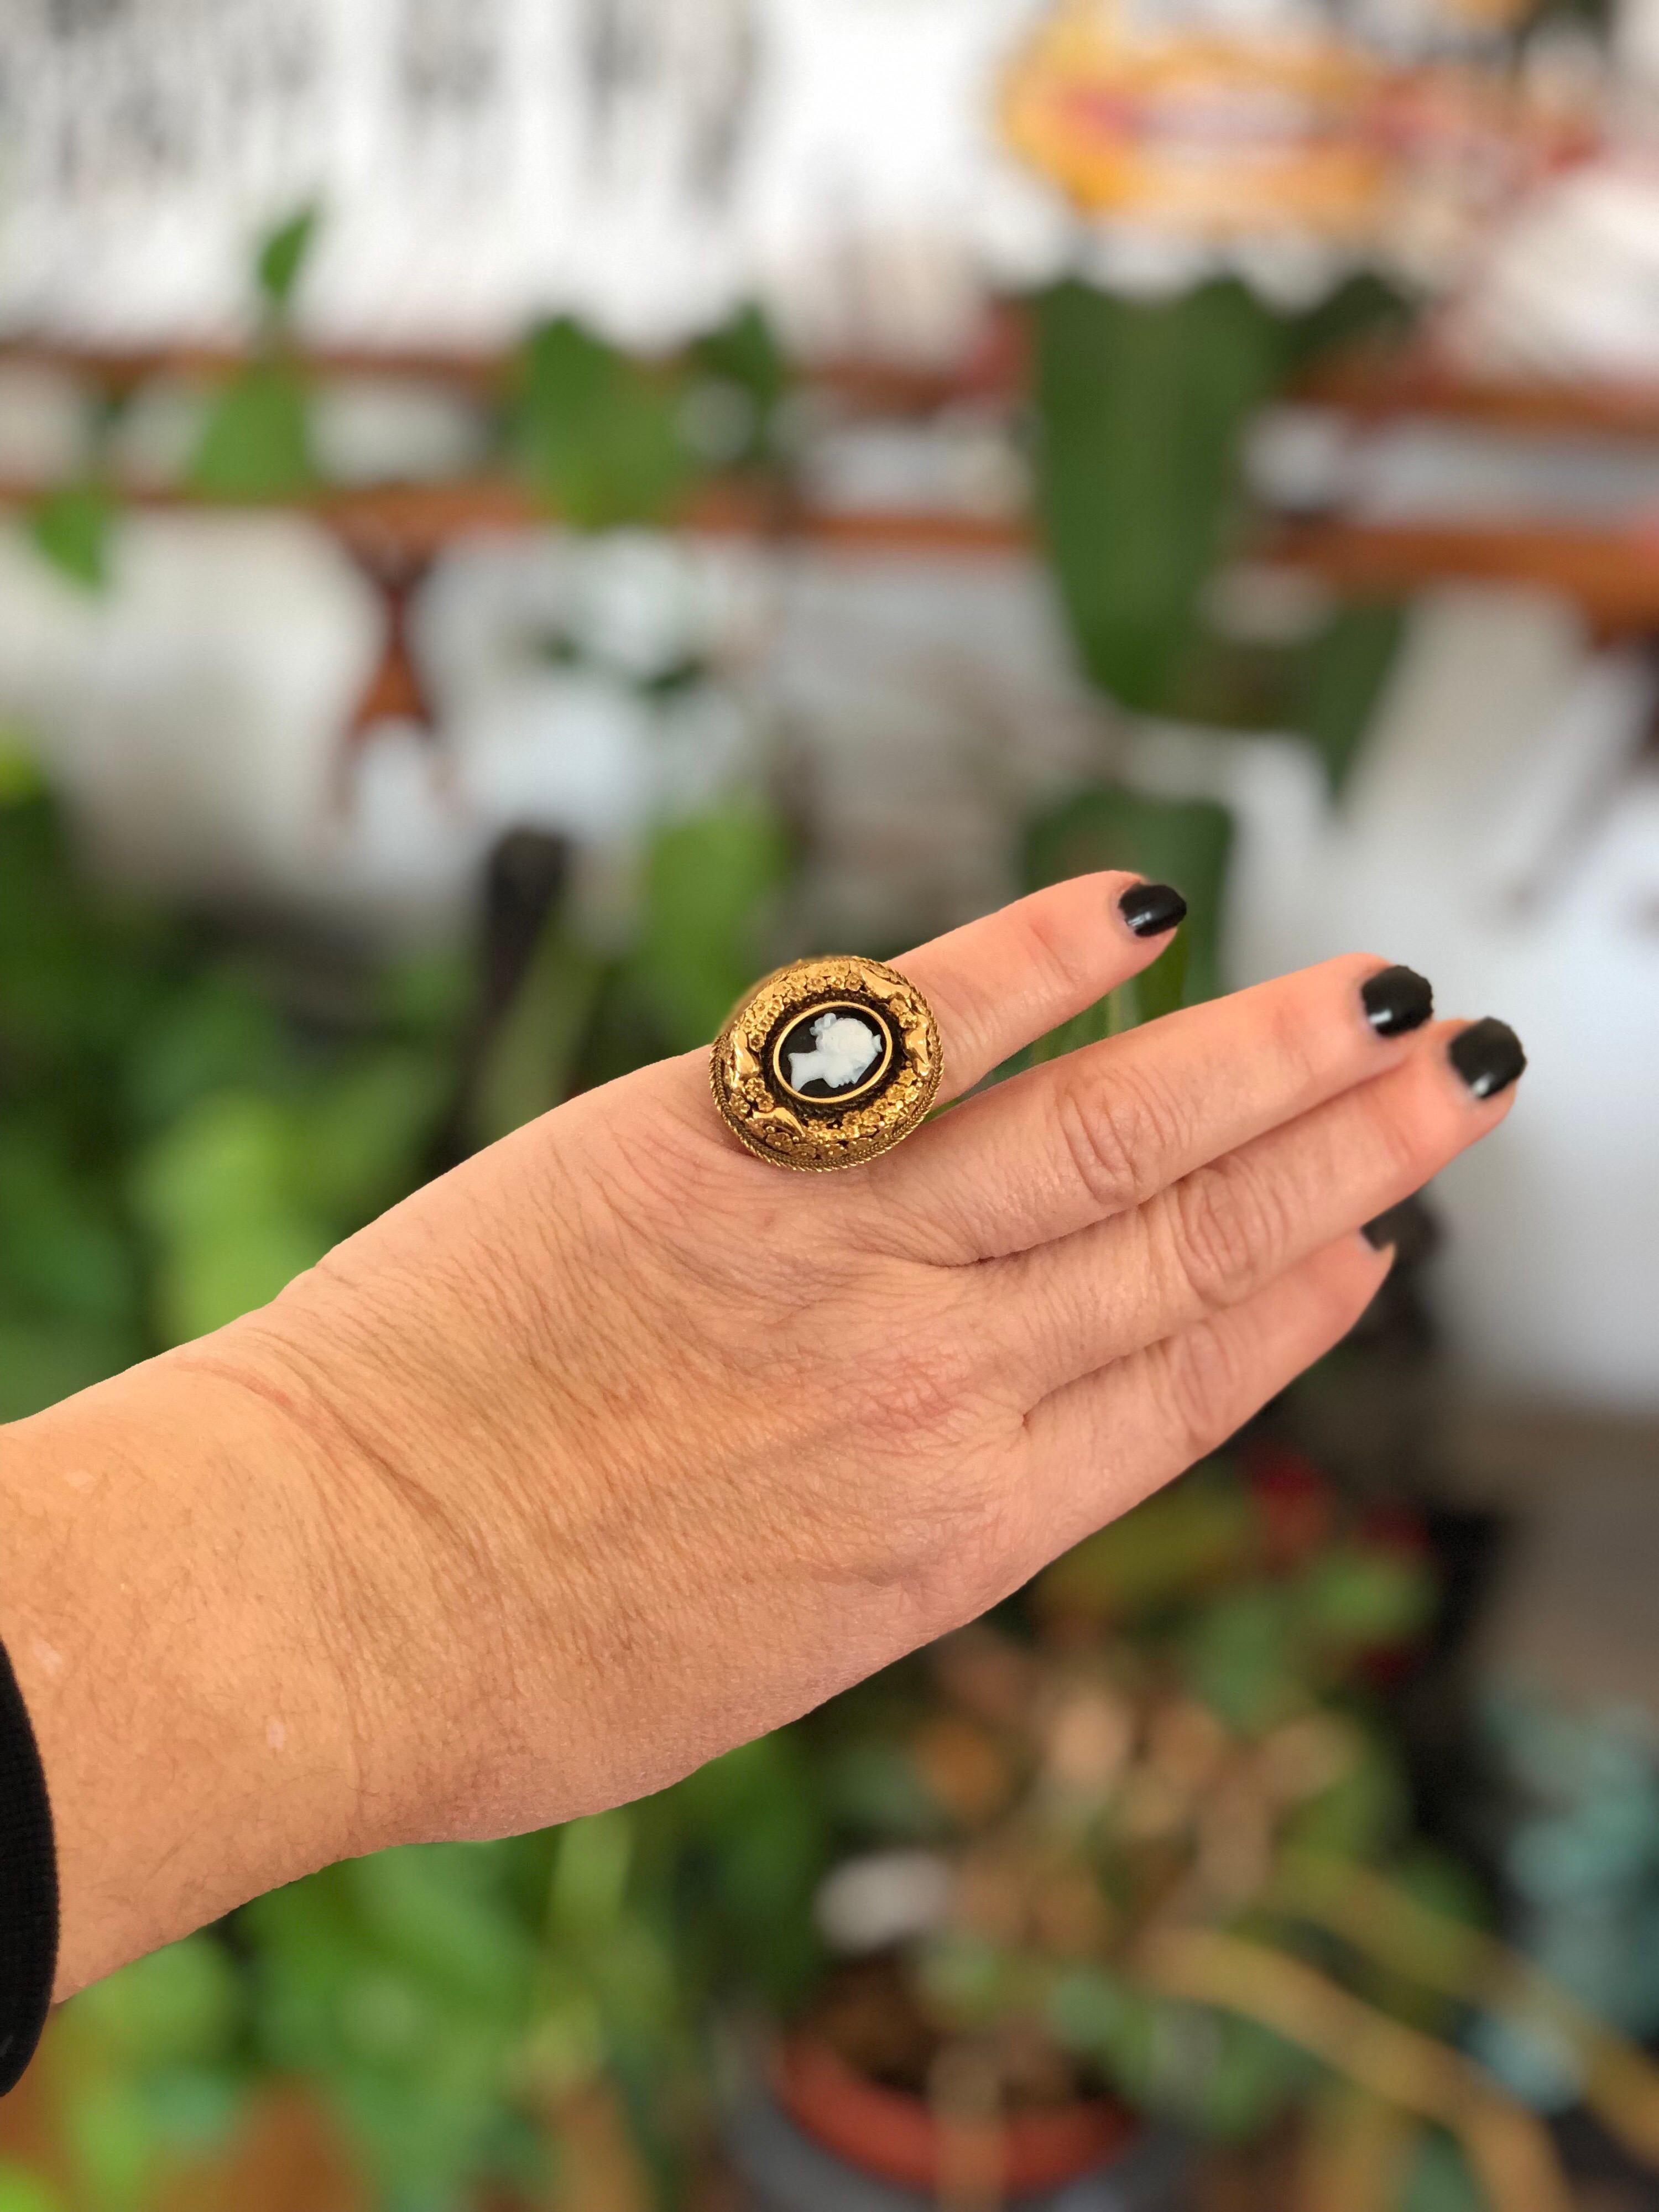 14 Karat gold Victorian Carved Agate Cameo Ring 1800s  In Good Condition For Sale In Wallkill, NY